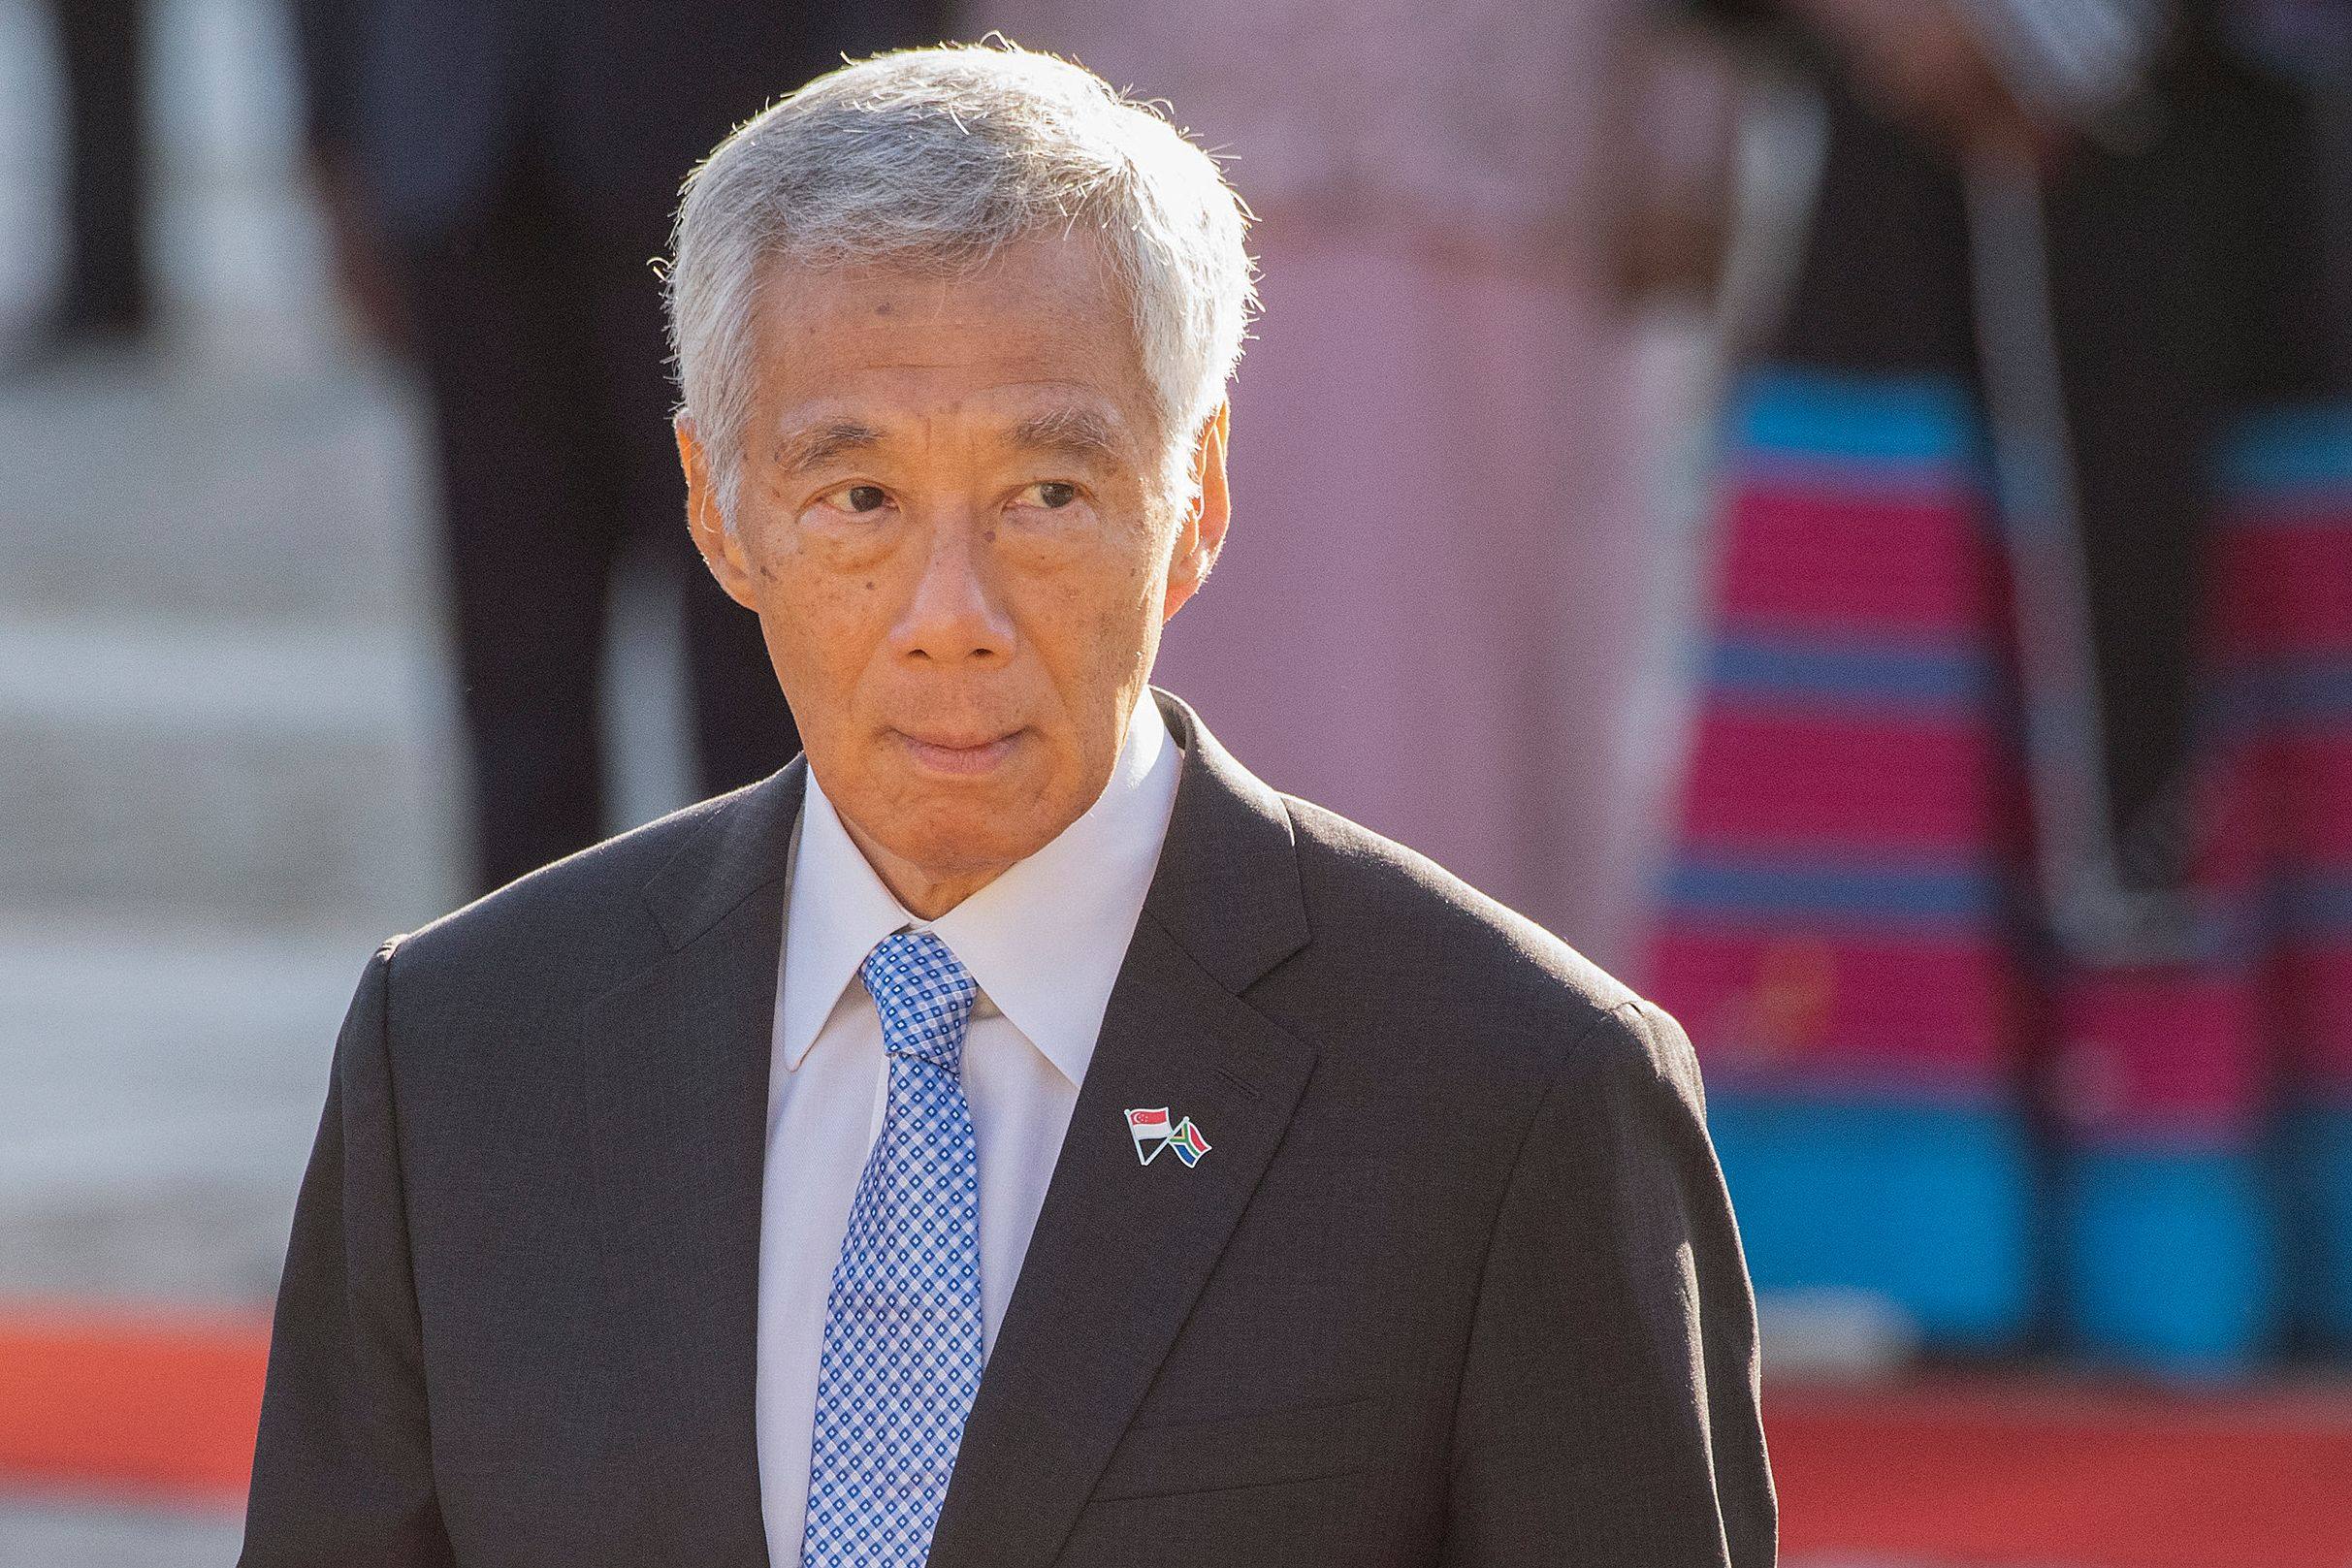 Singapore’s Prime Minister Lee Hsien Loong. Photo: AFP